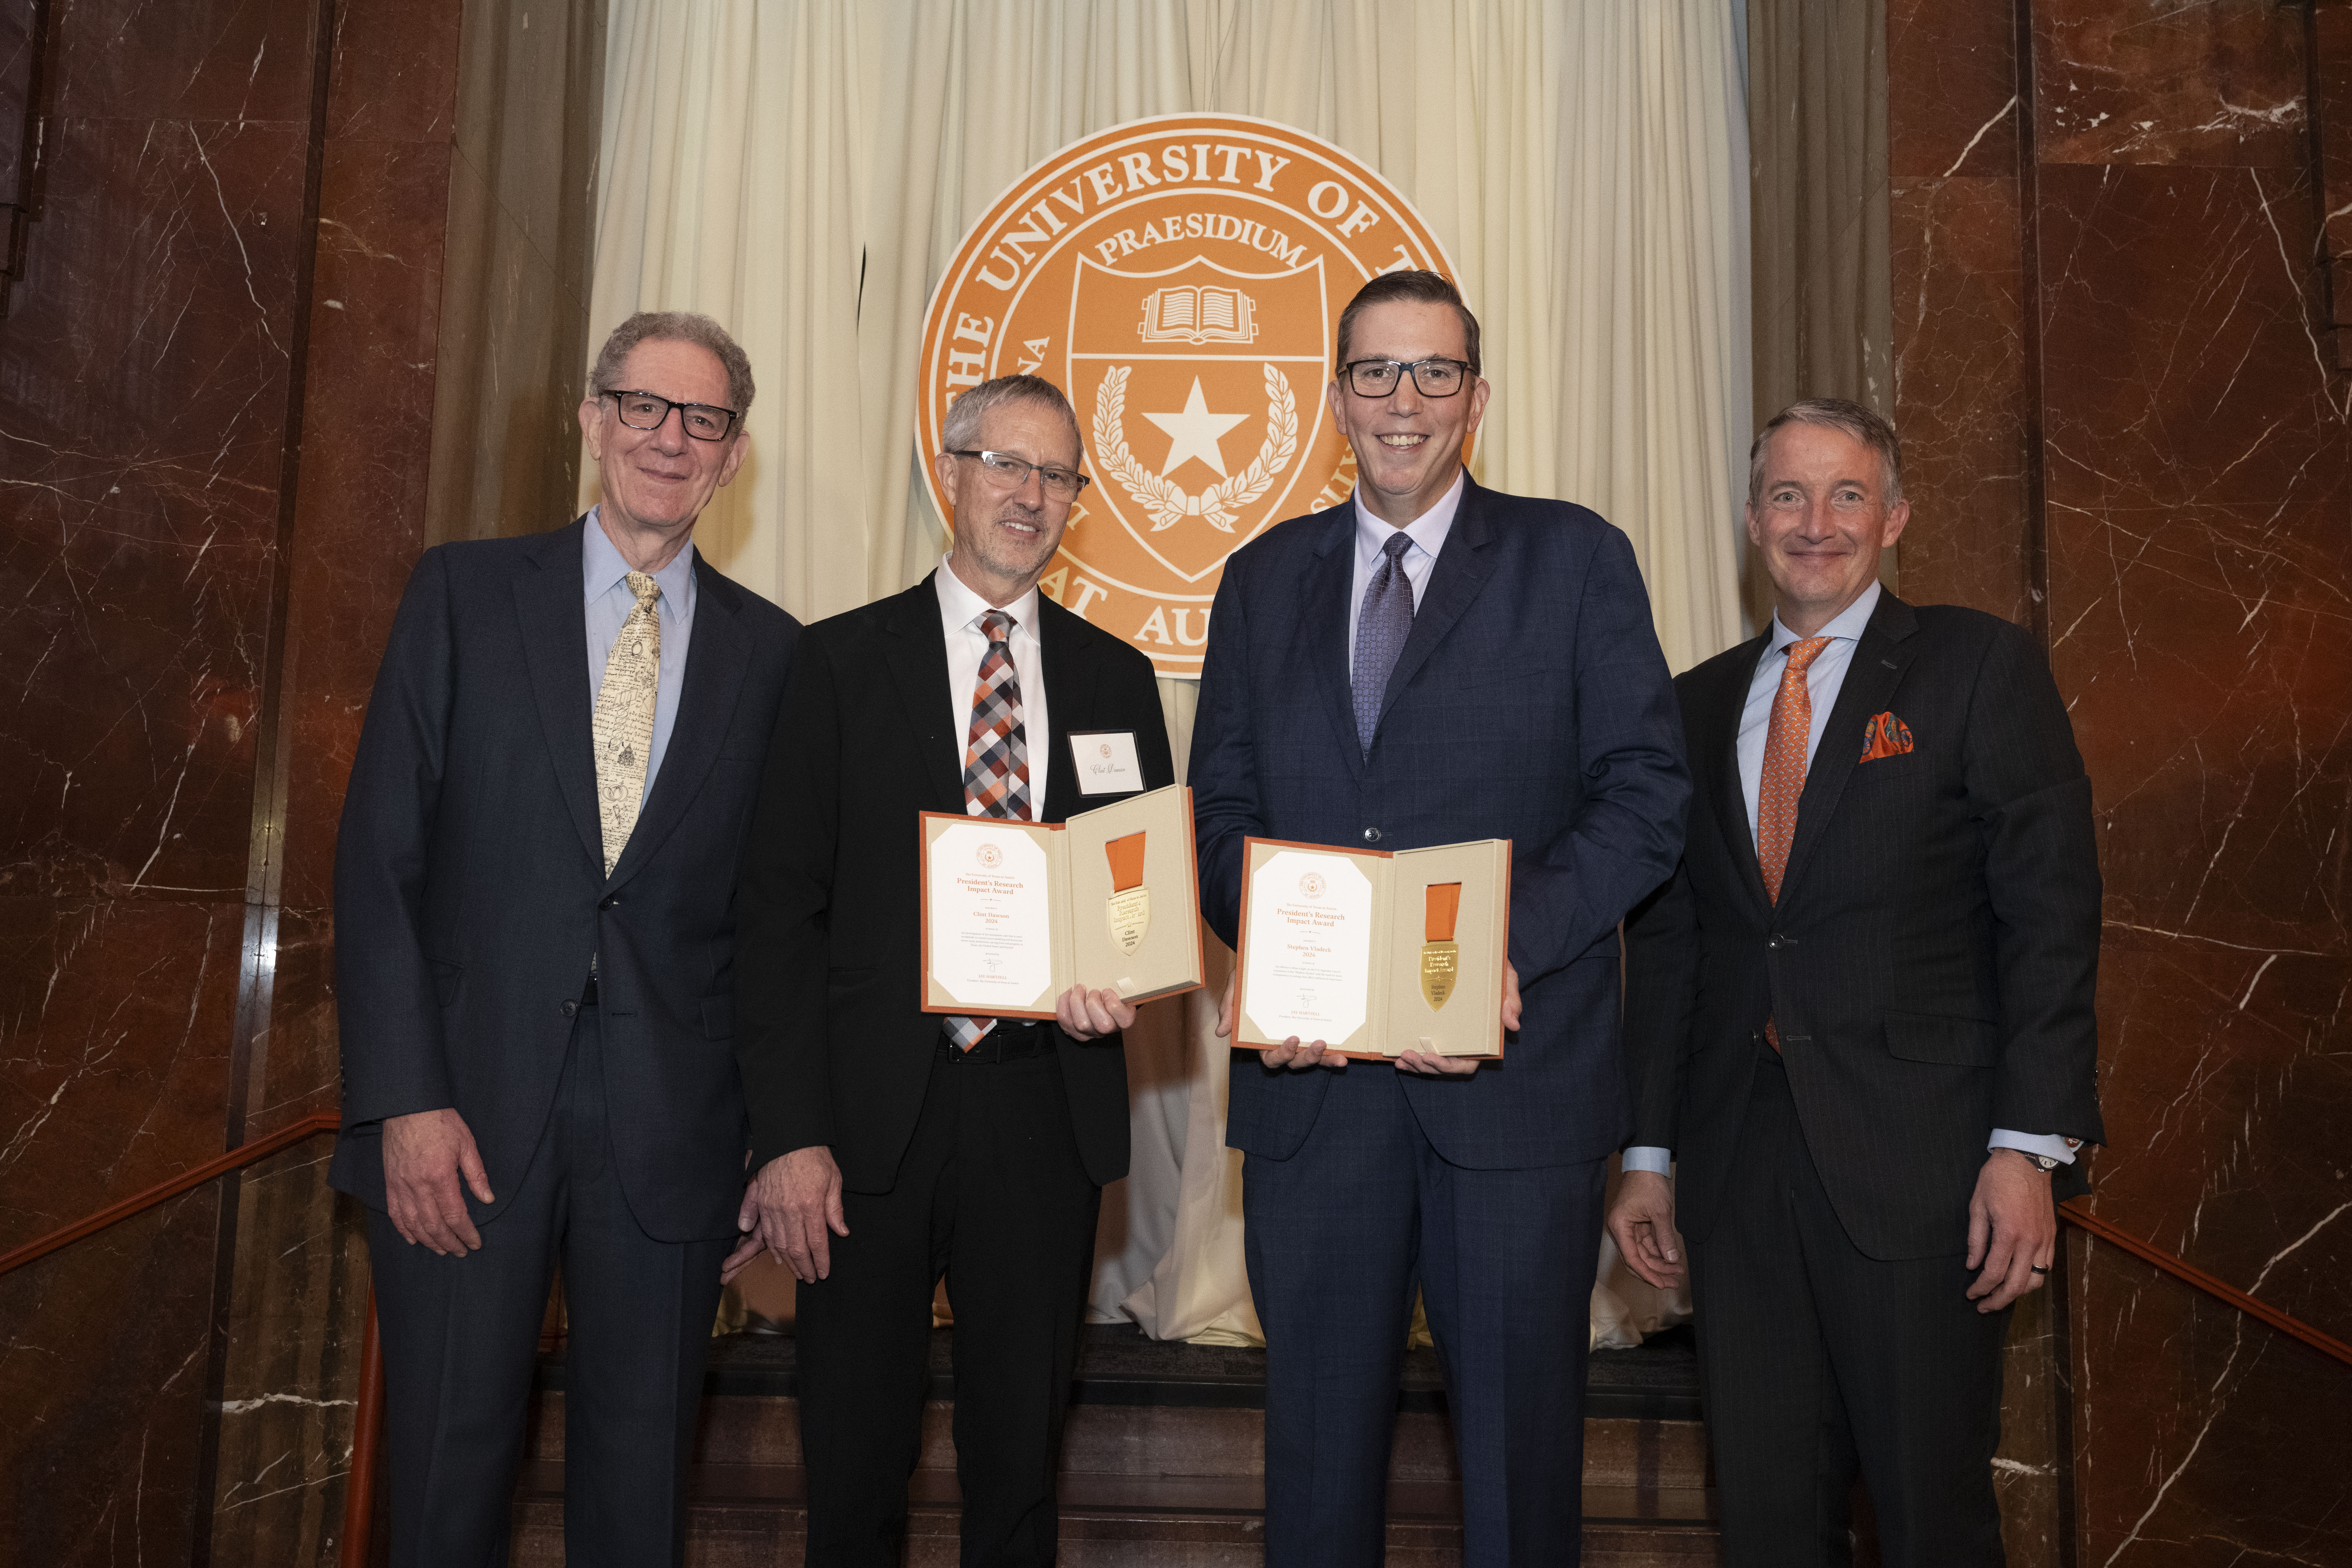 President's Research Impact Awards